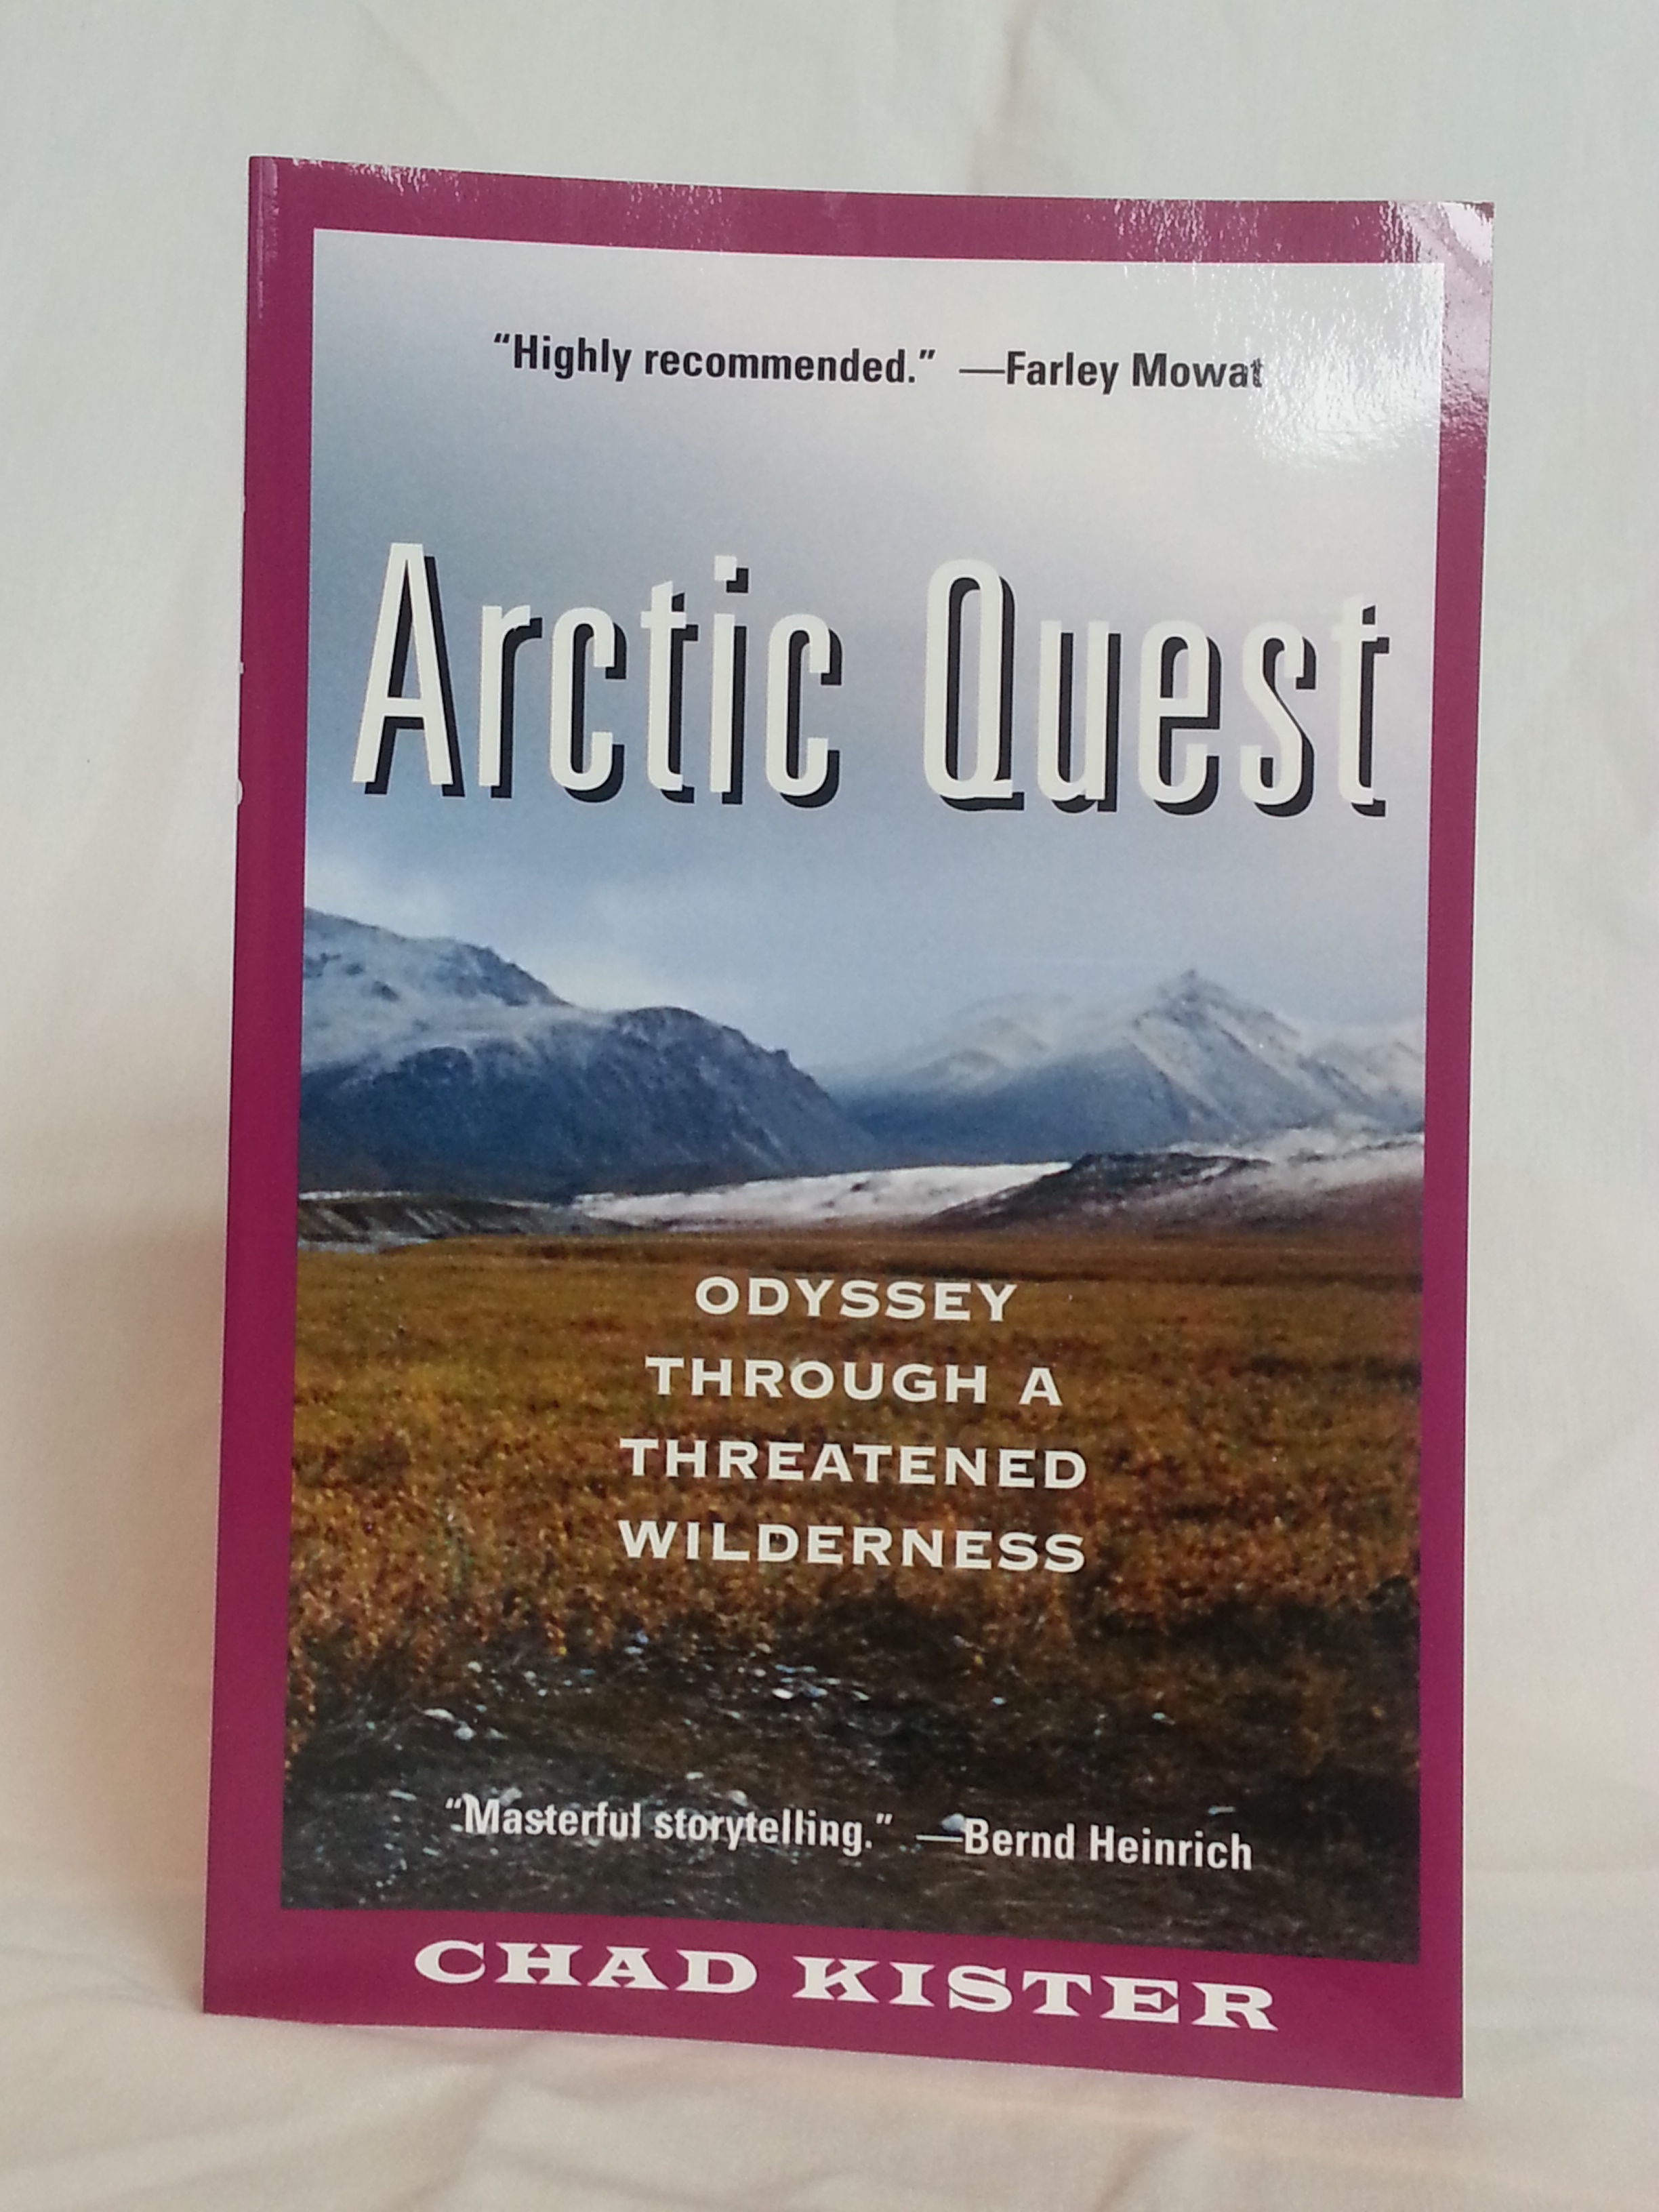 Arctic Quest - The Odyssey Through A Threatened Wilderness